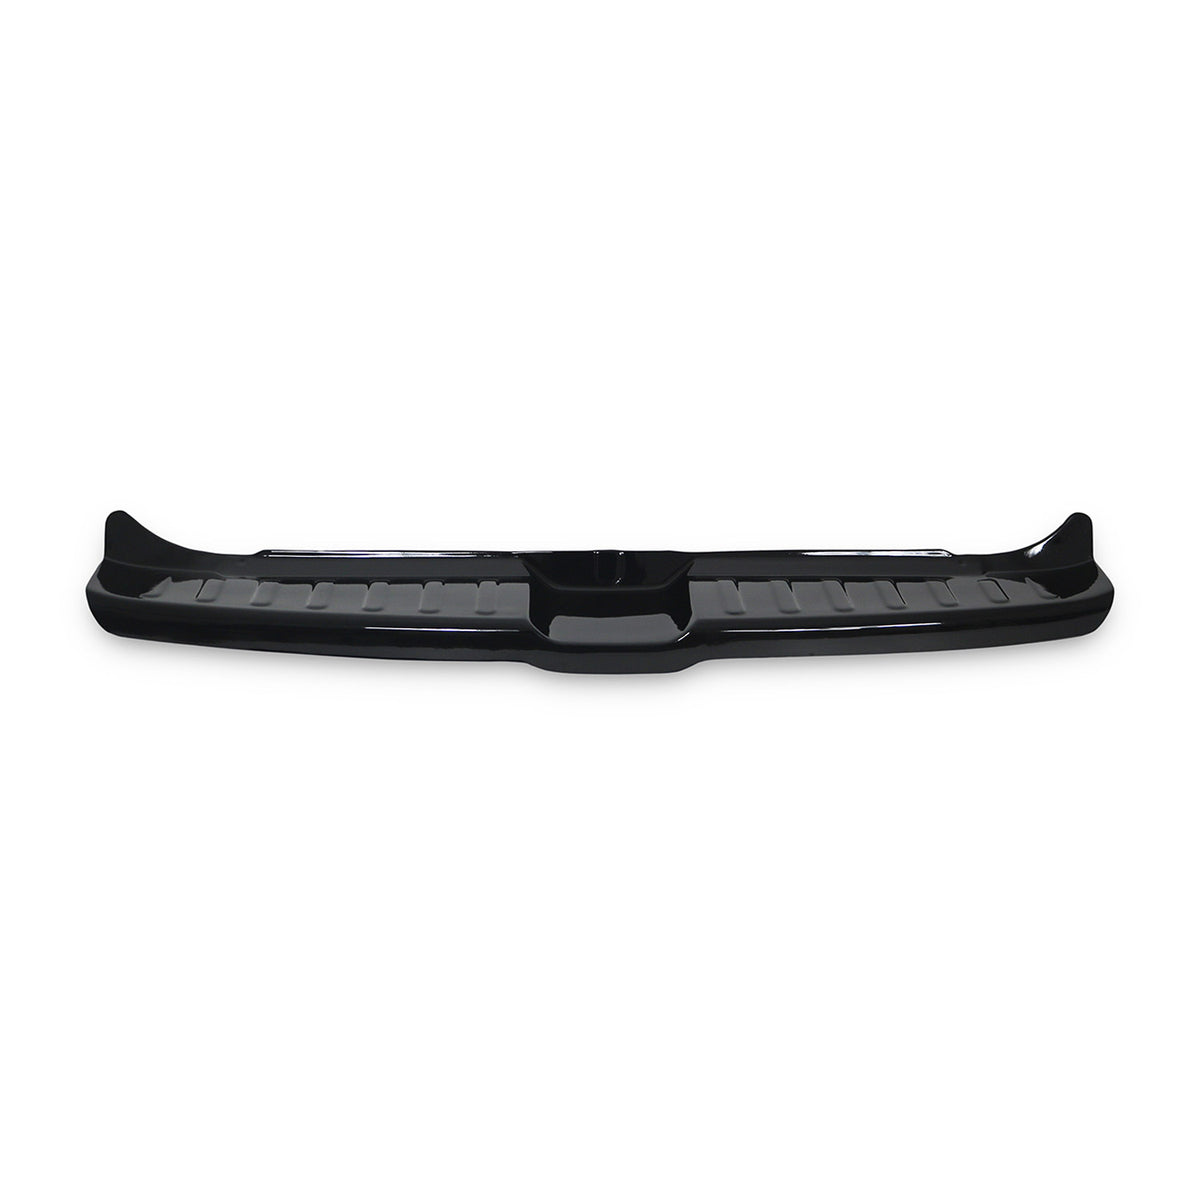 Loading sill protection bumper protection for Dacia Sandero 2021-2023 gloss black ABS